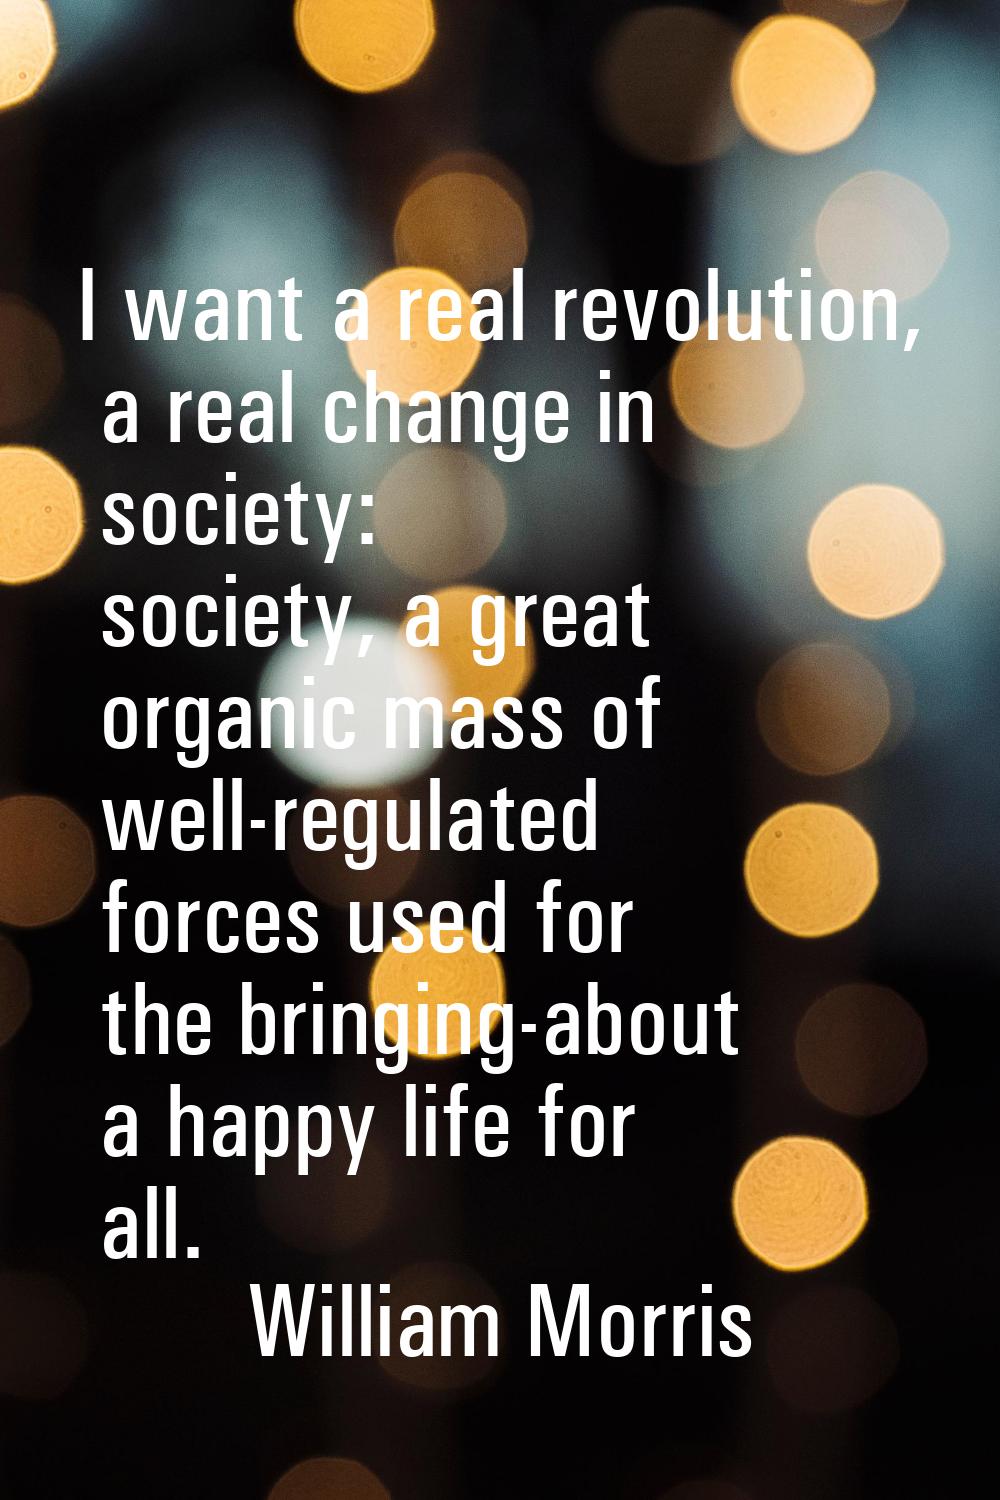 I want a real revolution, a real change in society: society, a great organic mass of well-regulated